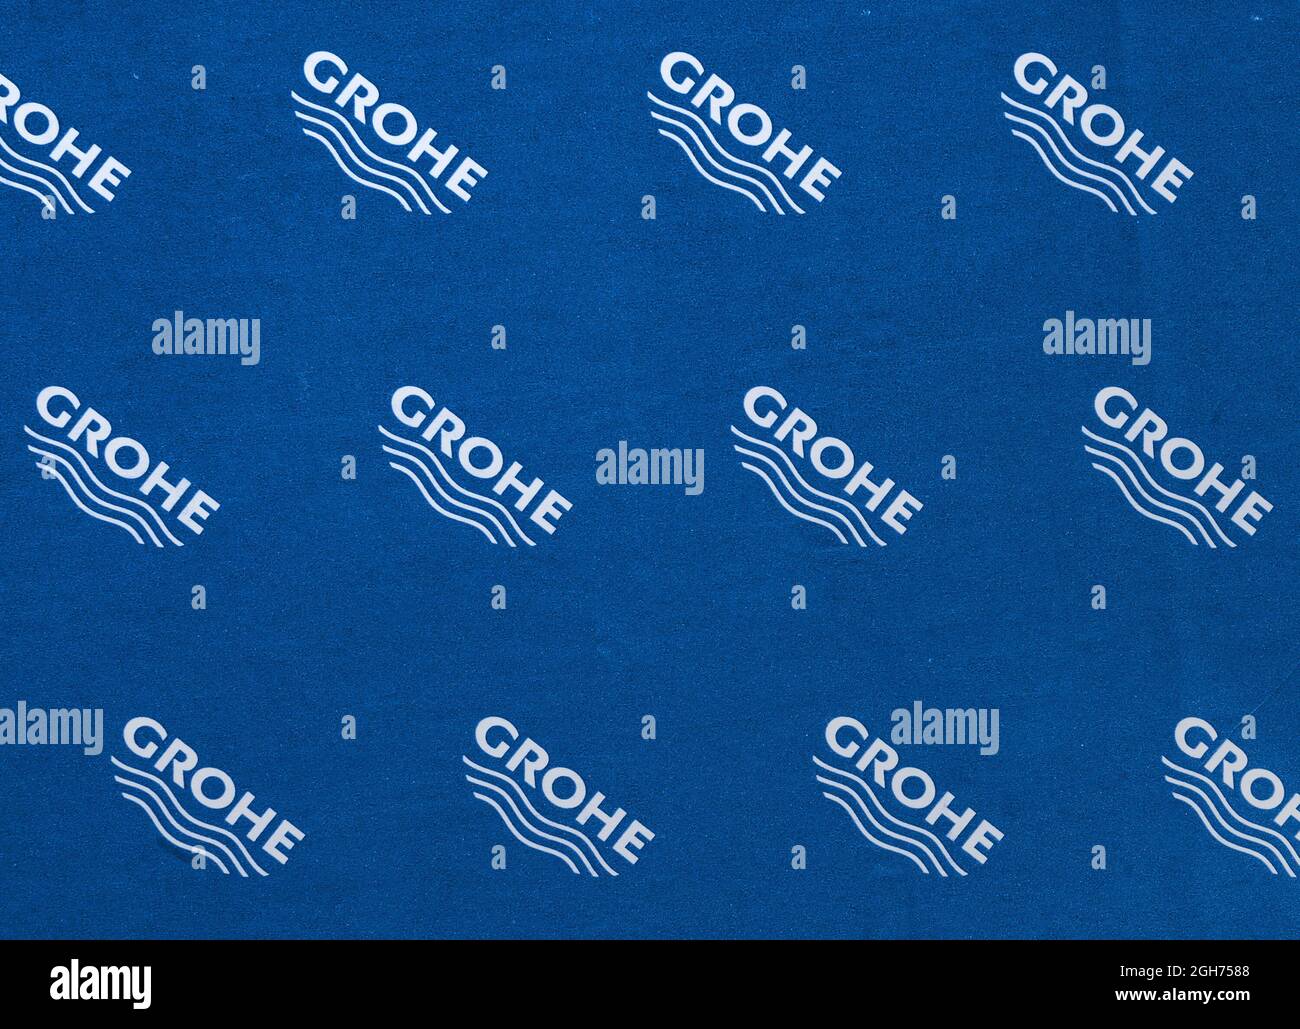 logo sign pattern like on firm blue coloration package cardboard. Grohe is german manufacturer of luxury plumbing ware Stock Photo